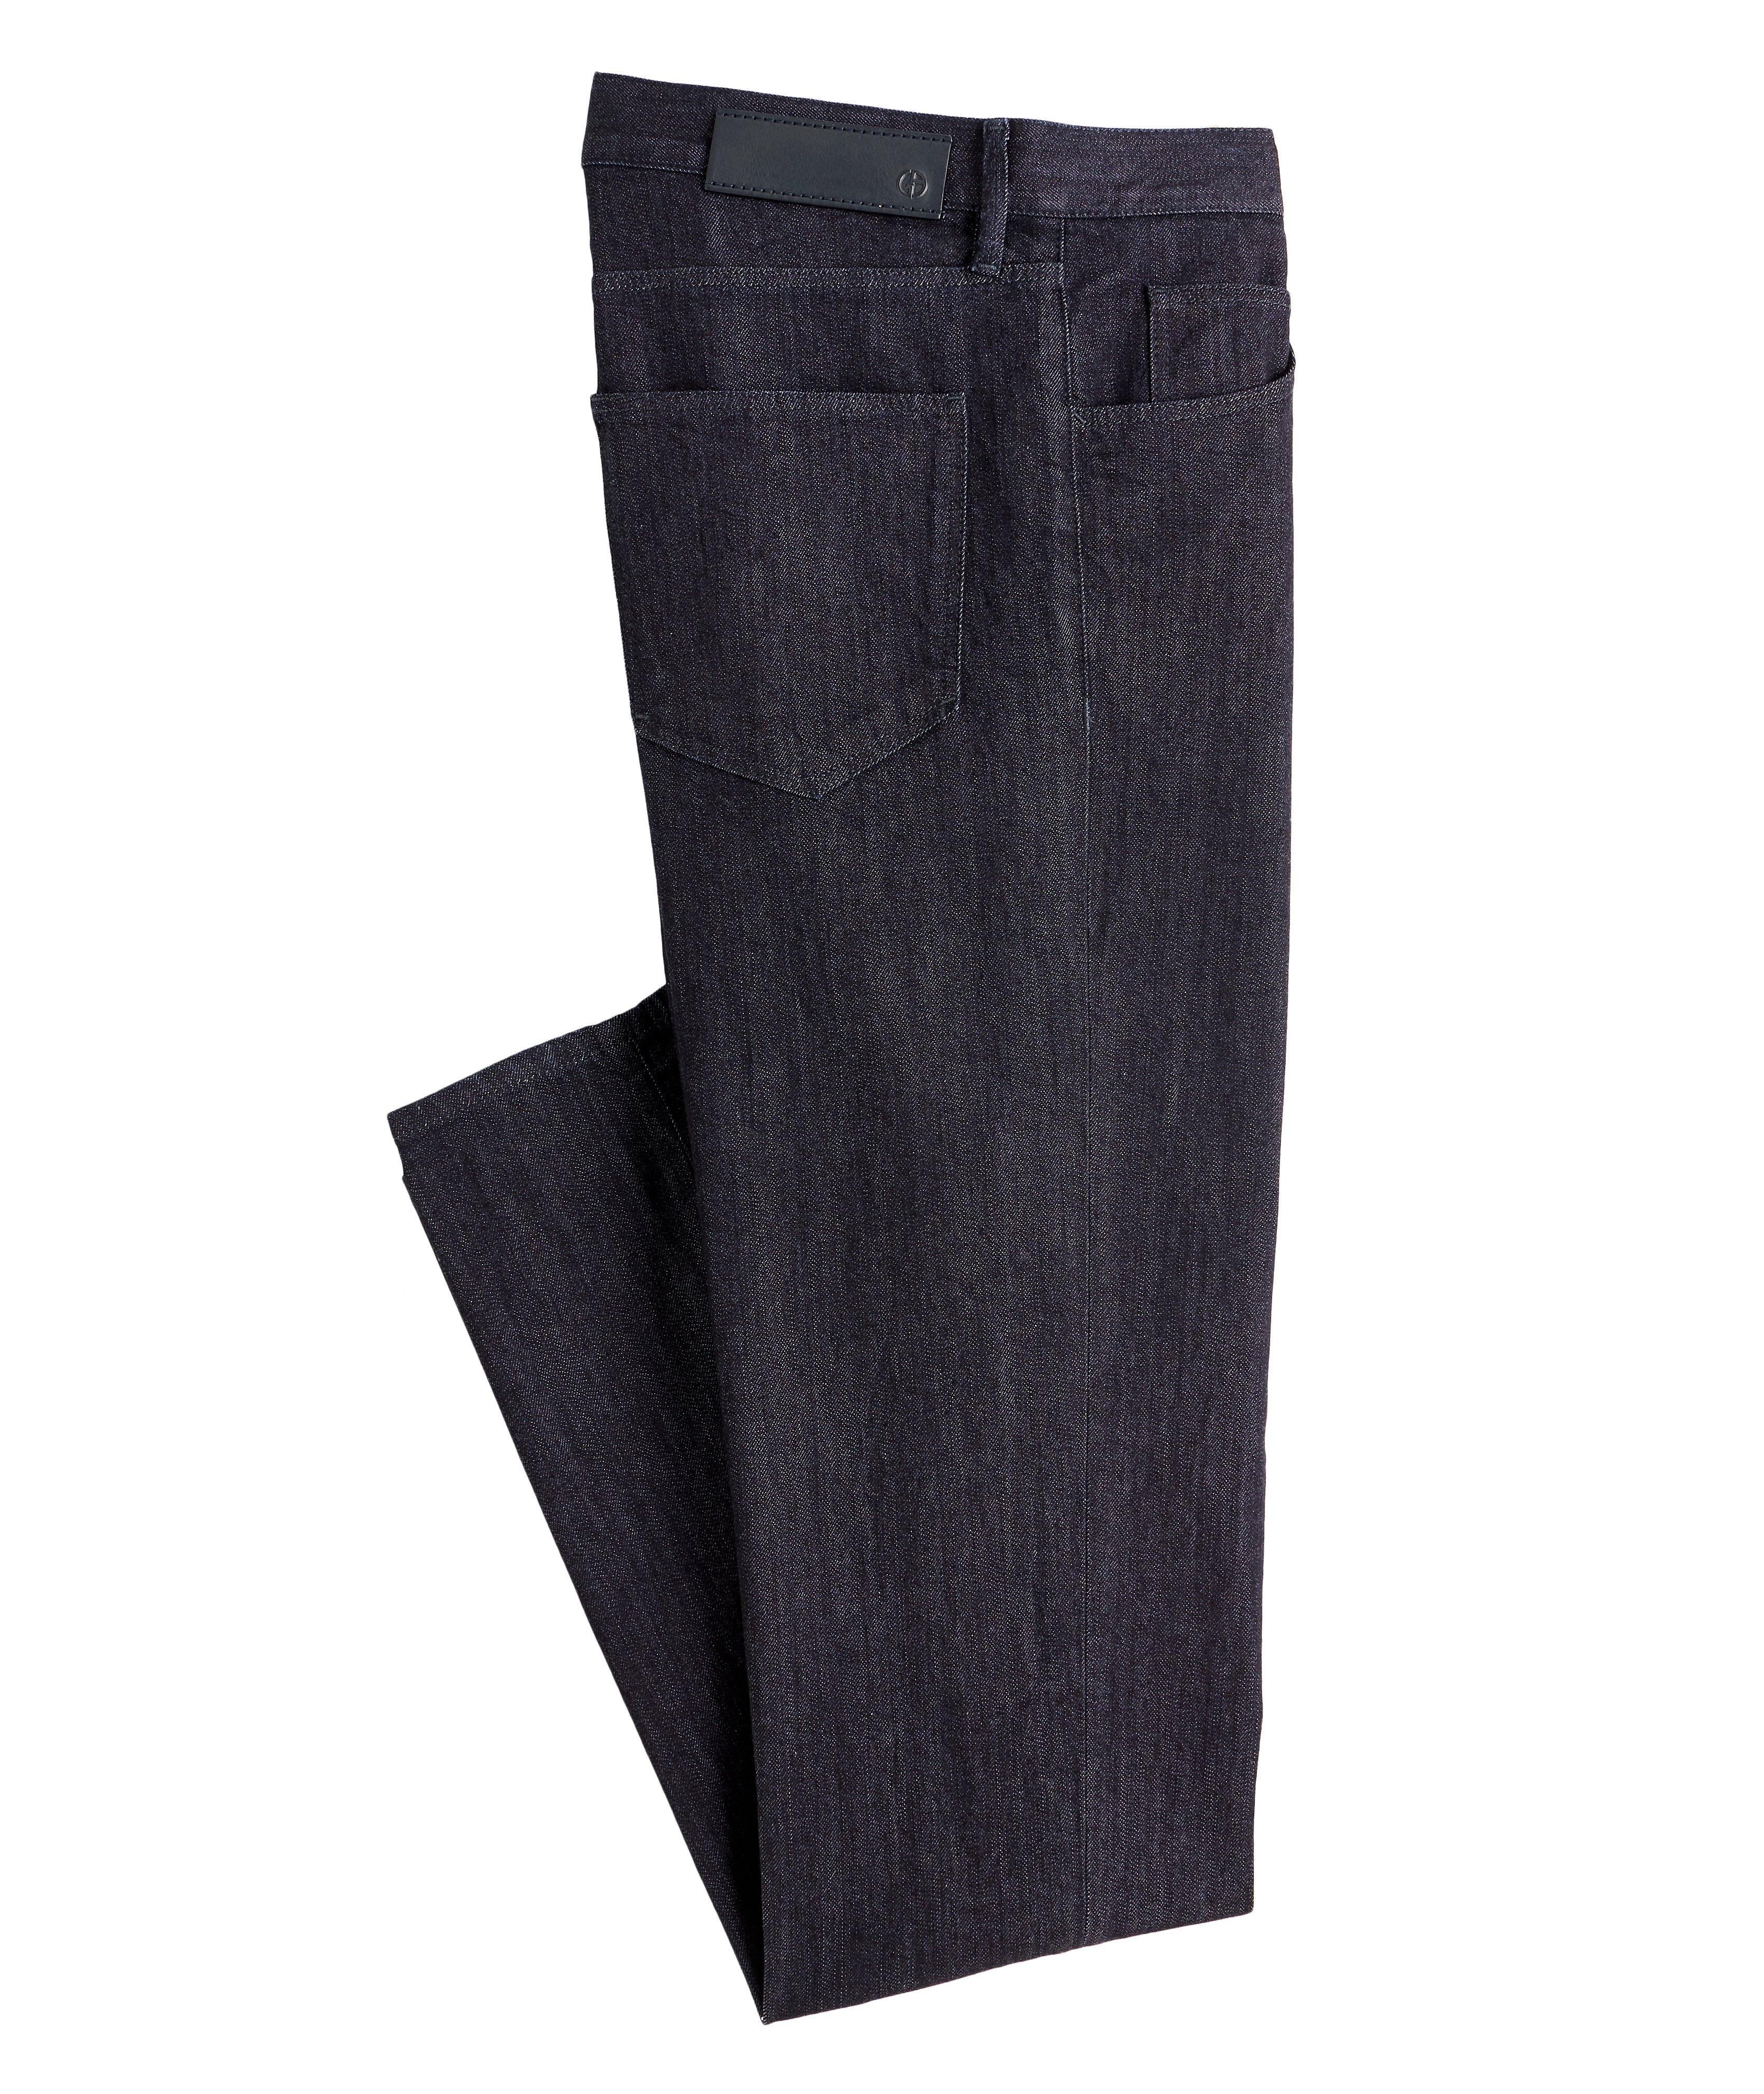 J25 Tapered Stretch Jeans image 0